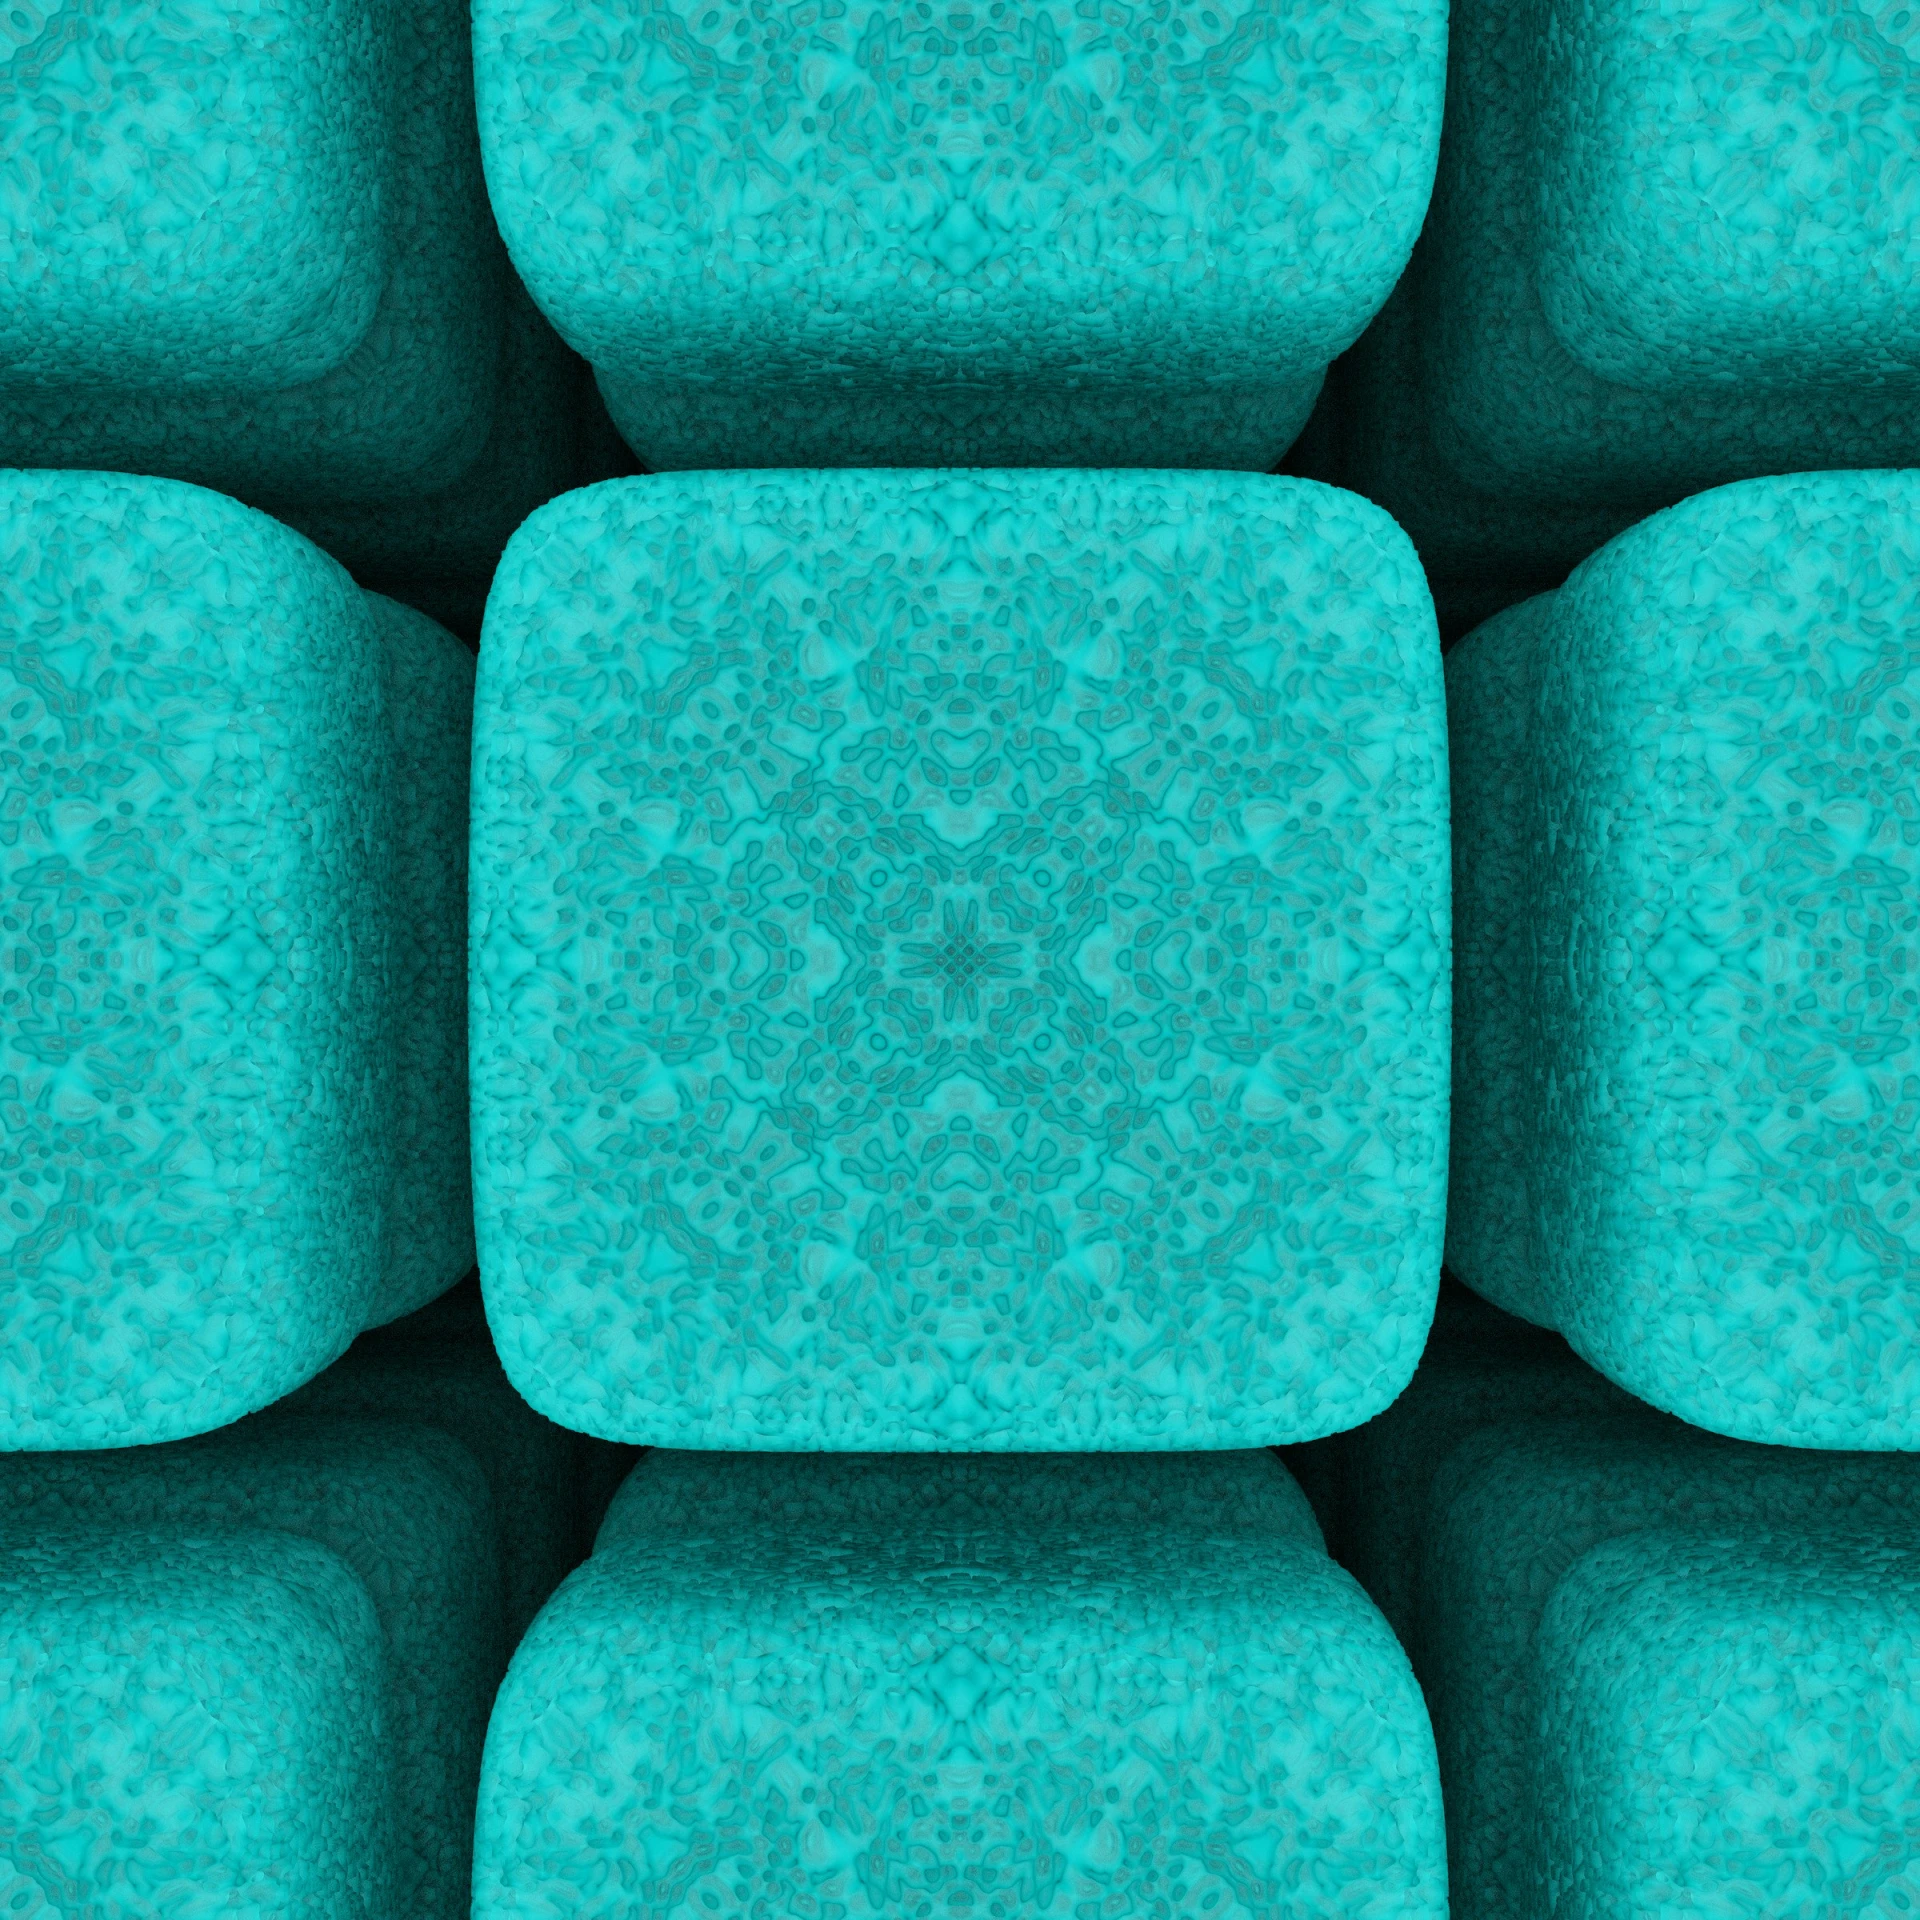 several squares arranged in a pattern in shades of teal